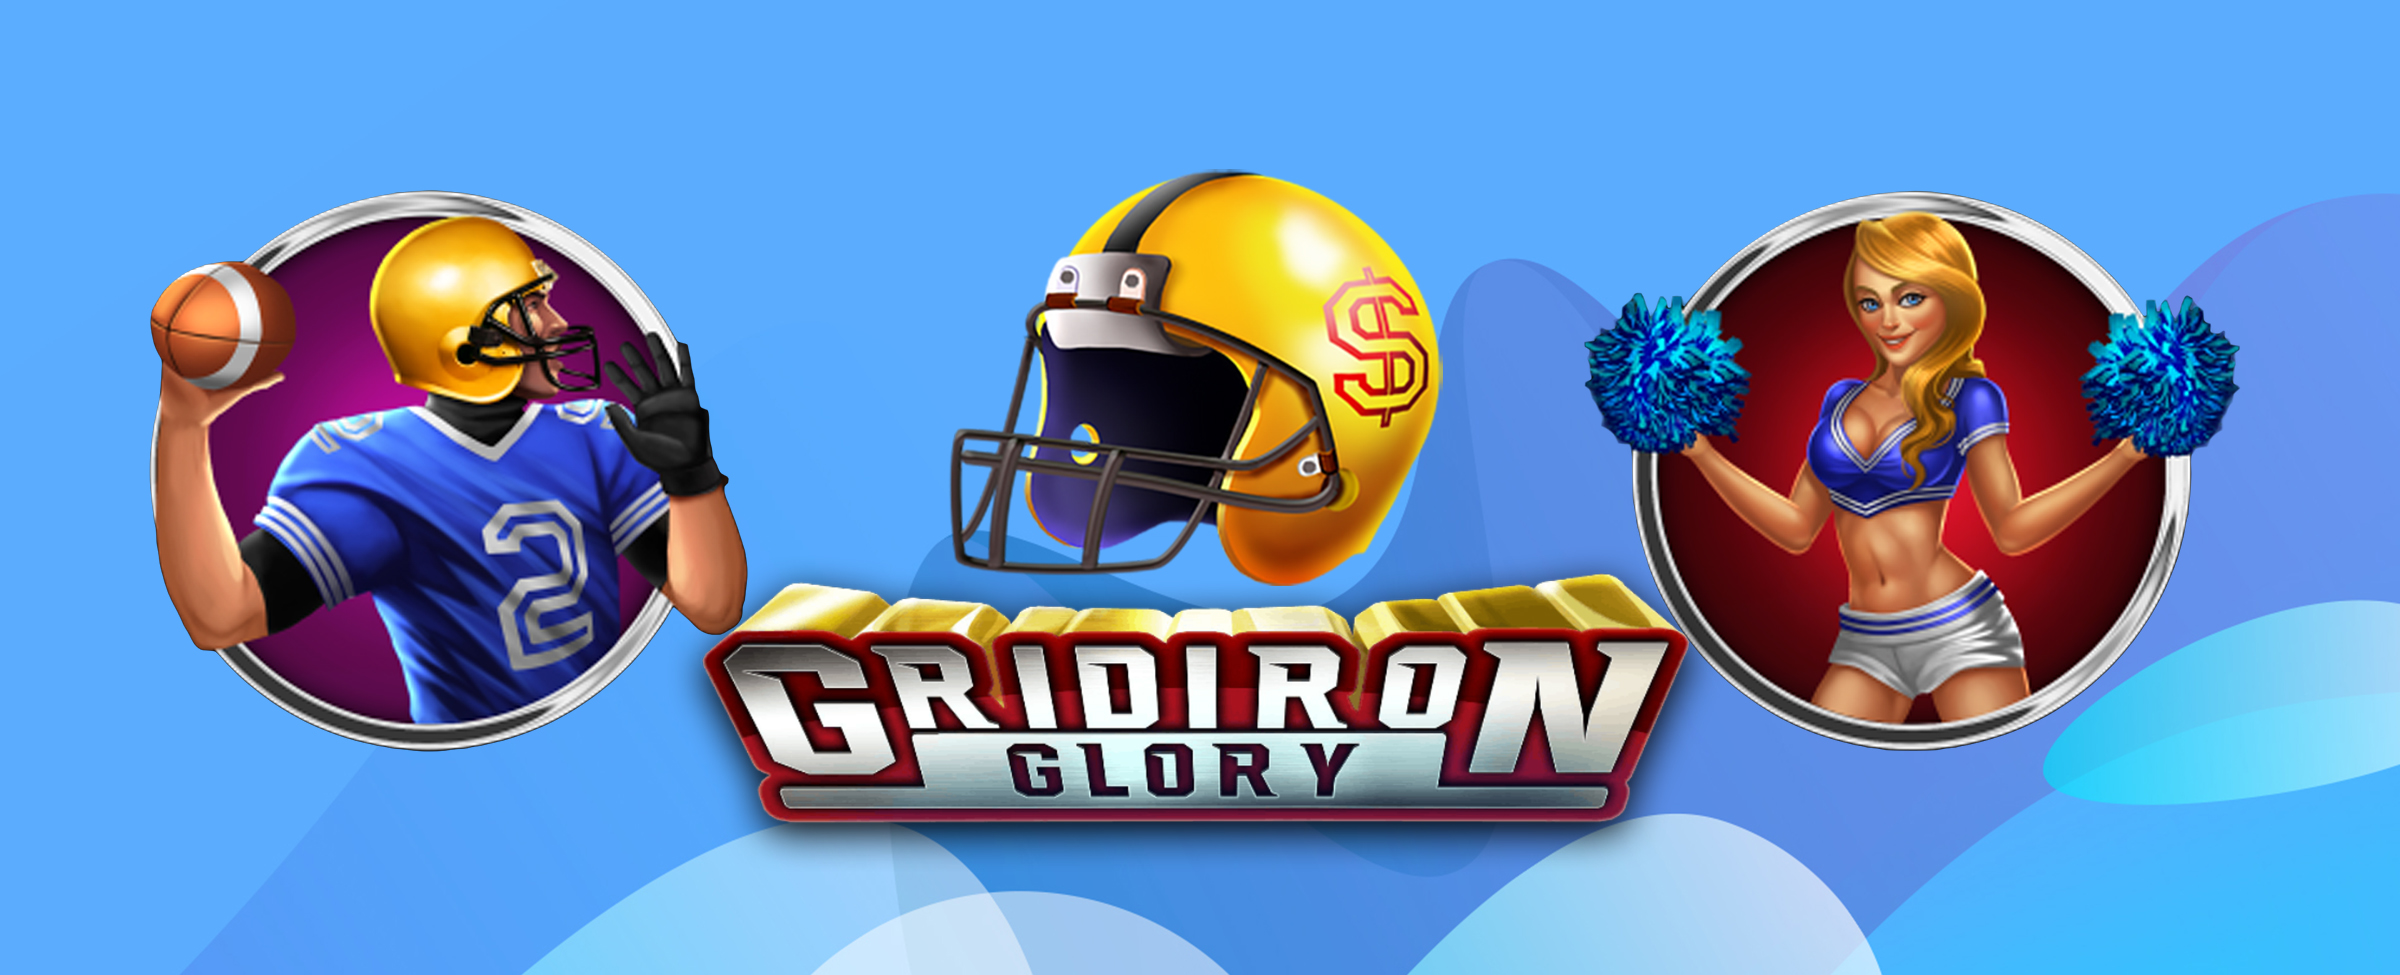 Take your team to the trophy when you play Gridiron Glory at Slots.lv.